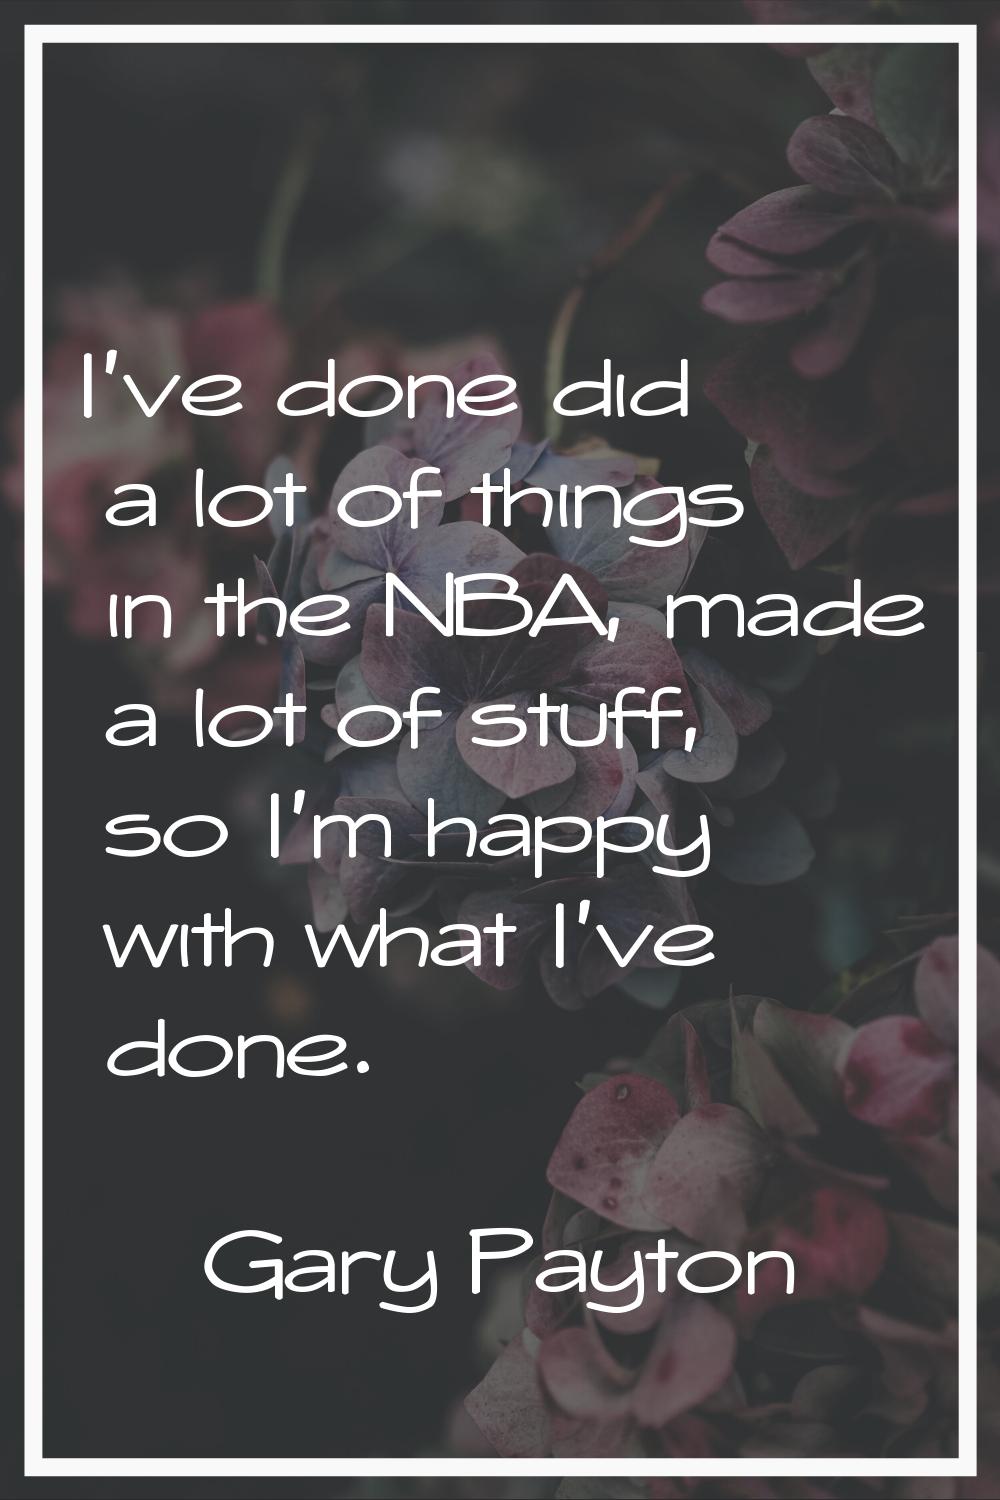 I've done did a lot of things in the NBA, made a lot of stuff, so I'm happy with what I've done.